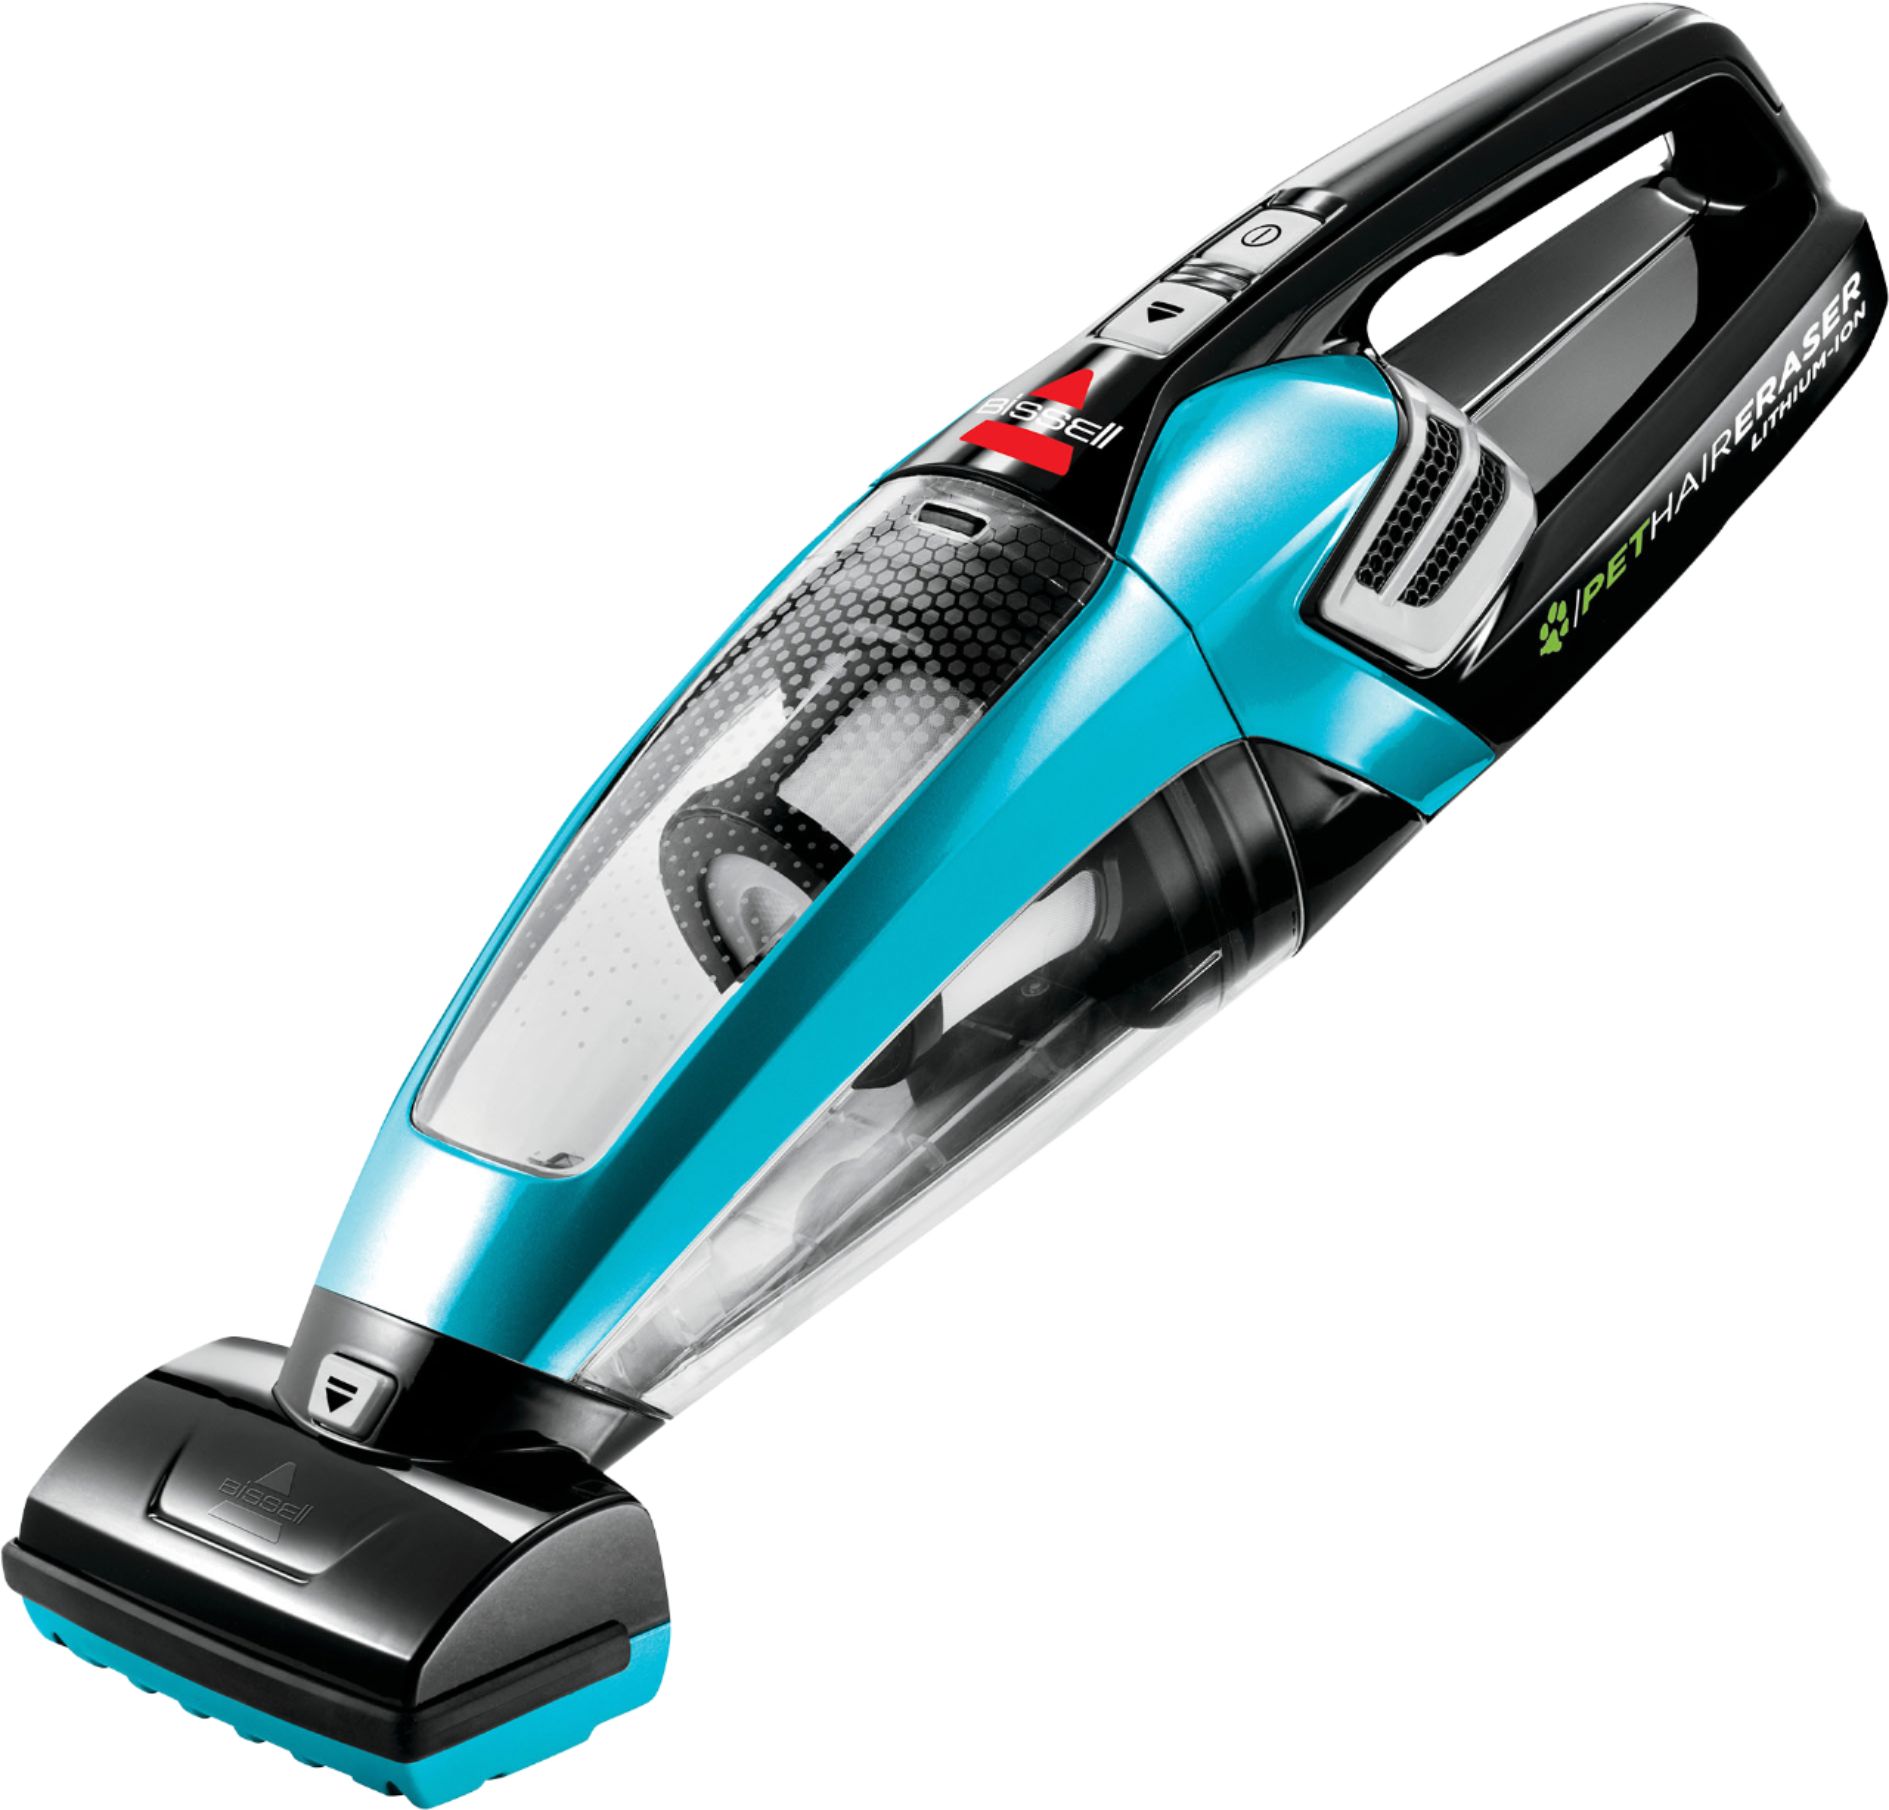 Angle View: BISSELL - Pet Hair Eraser Lithium Ion Hand Vacuum - Disco Teal & Black Accents